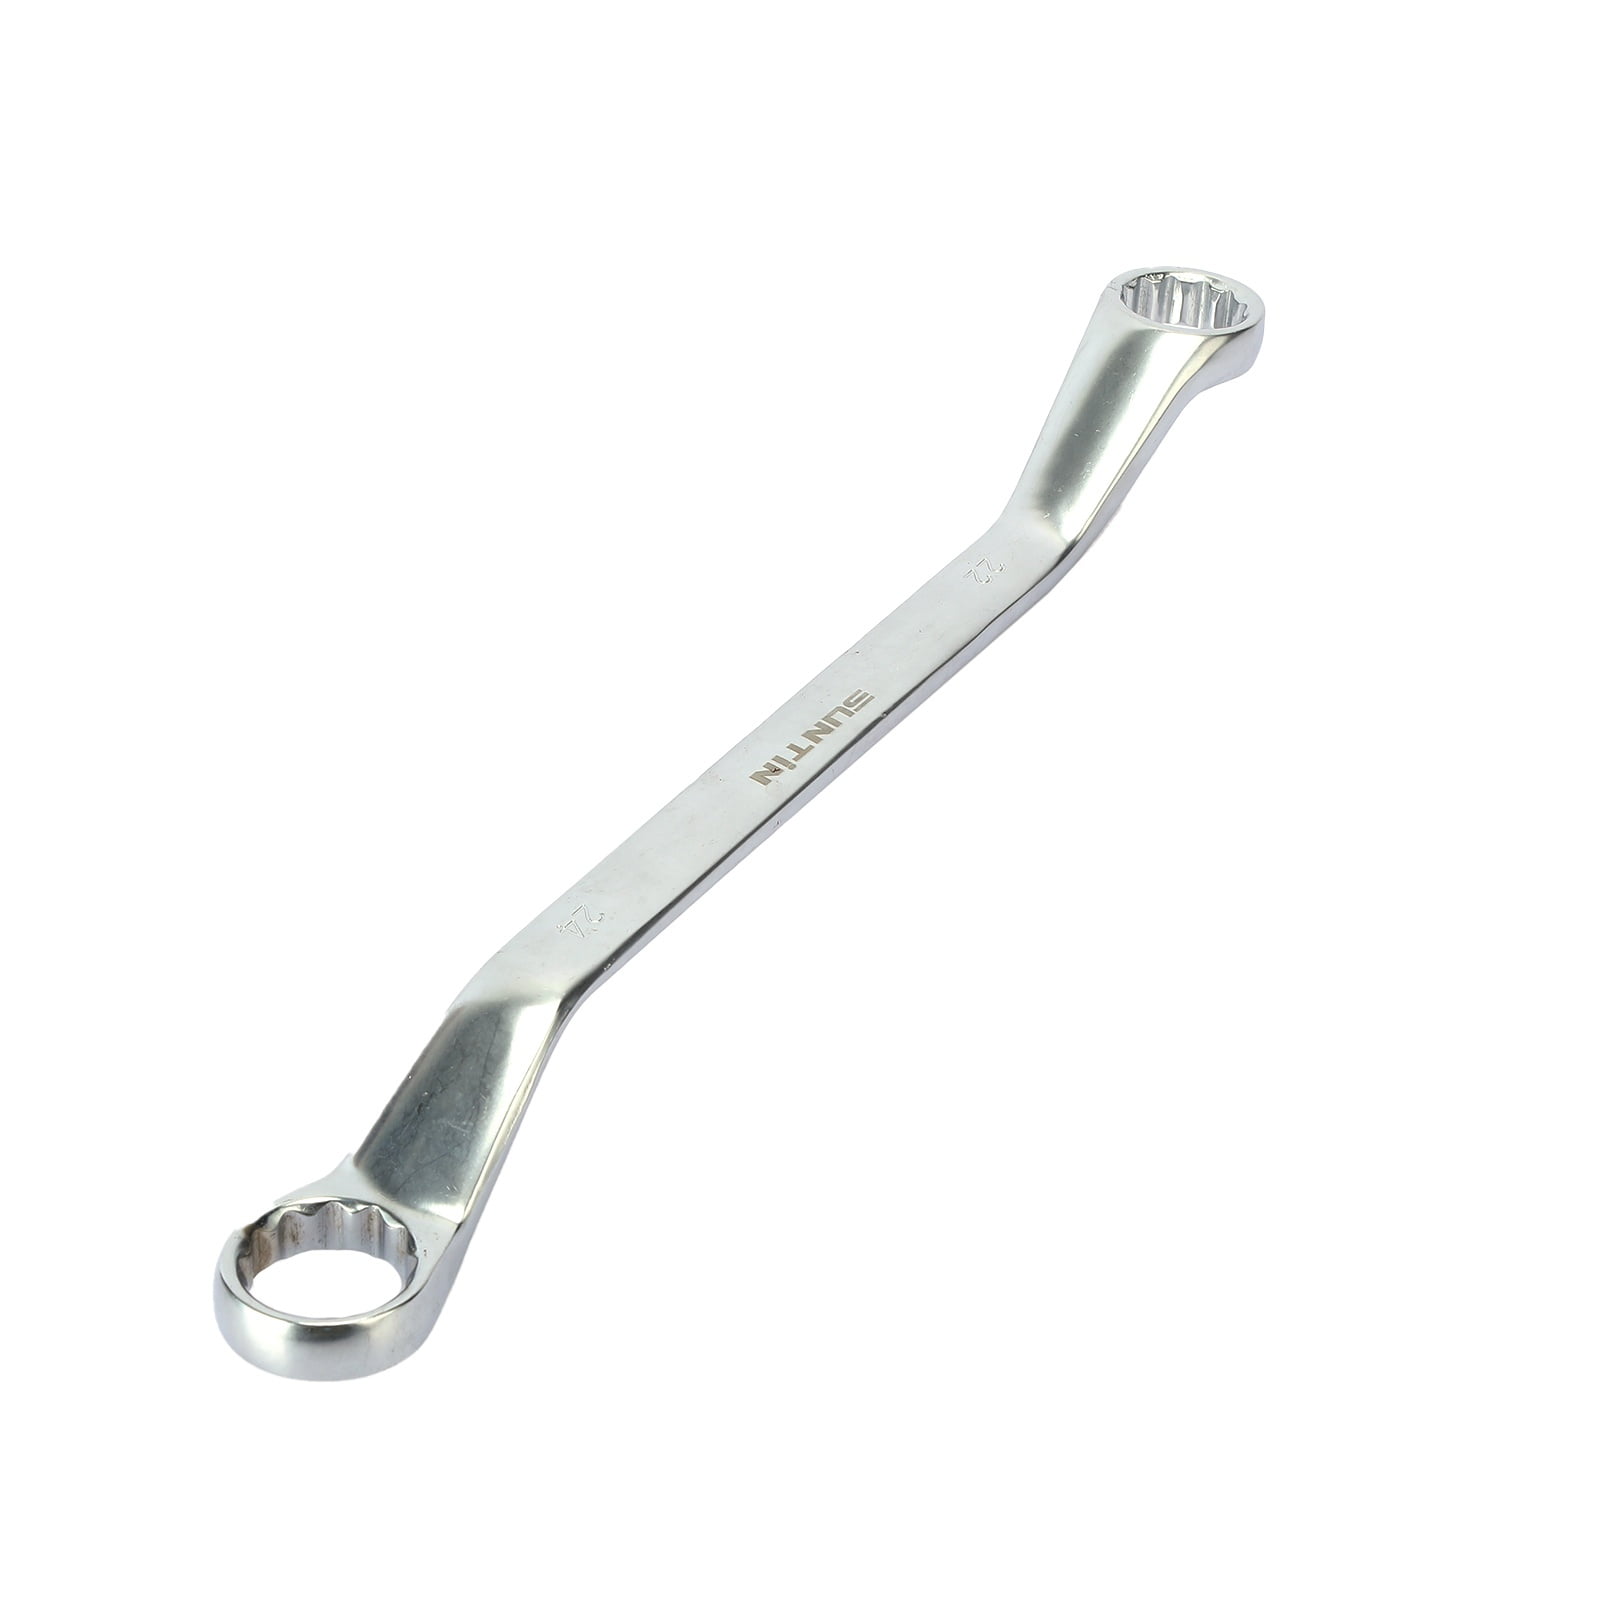 20MMX22MM DOUBLE OFFSET RING SPANNER | Shopee Malaysia